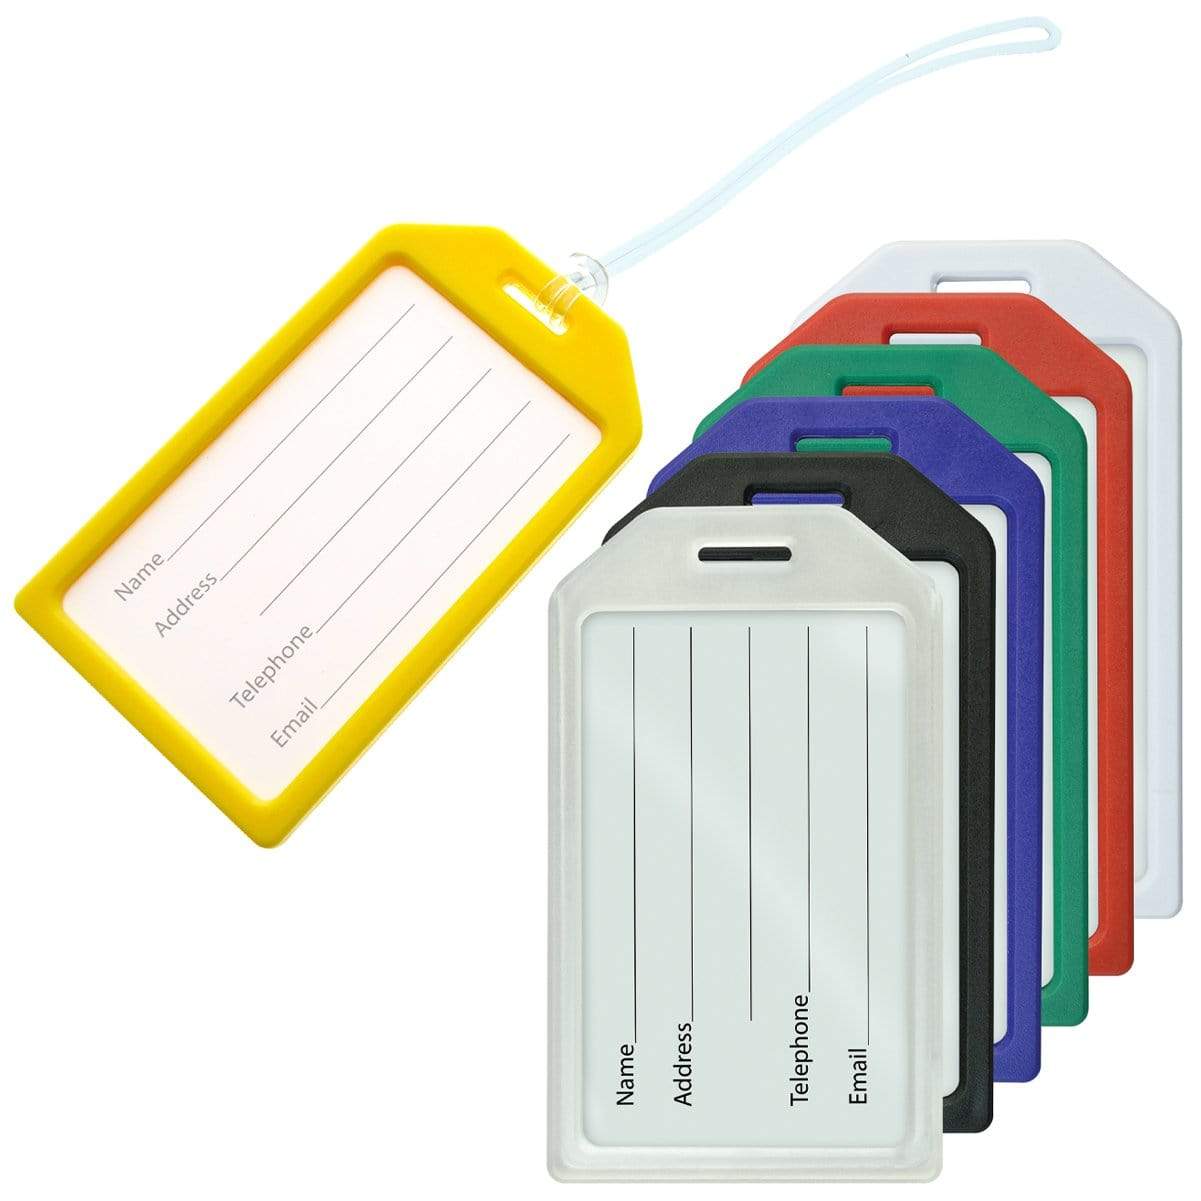 Luggage Tags Identification Tags Travel Identification Tags